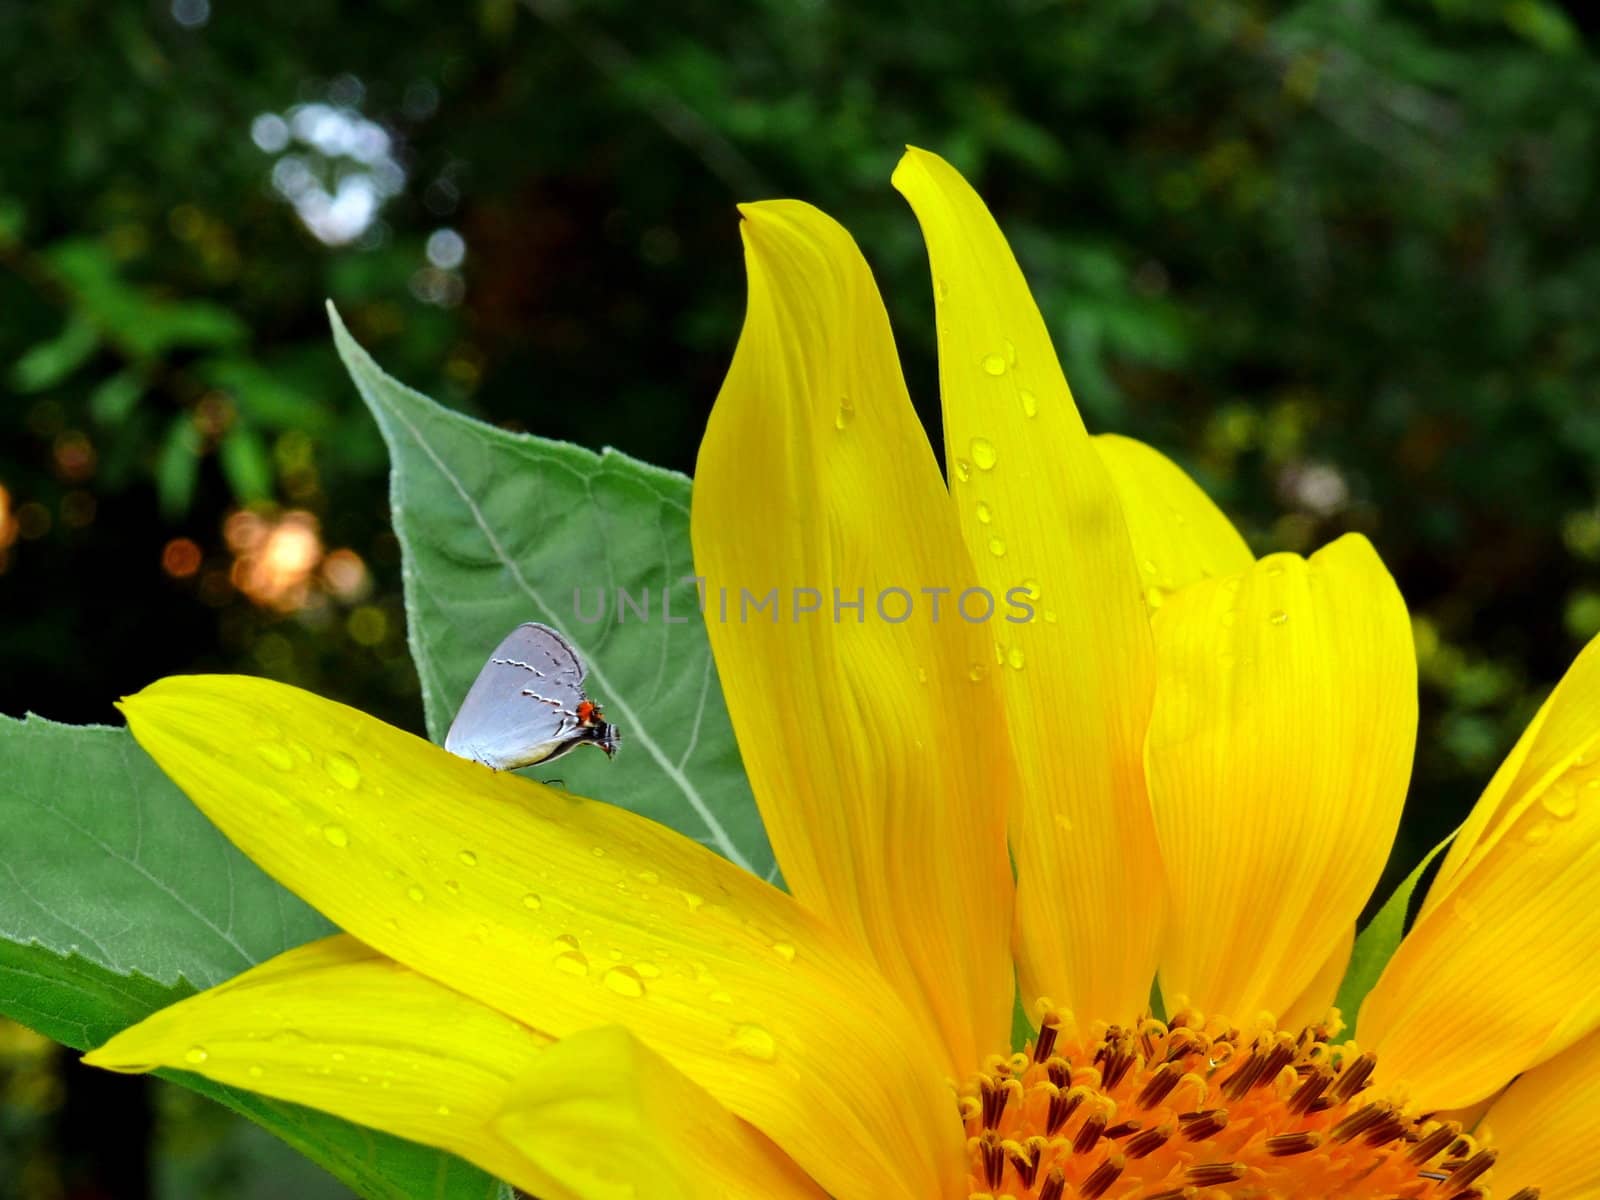 A giant sunflower with a small butterfly sitting on one of the petals.